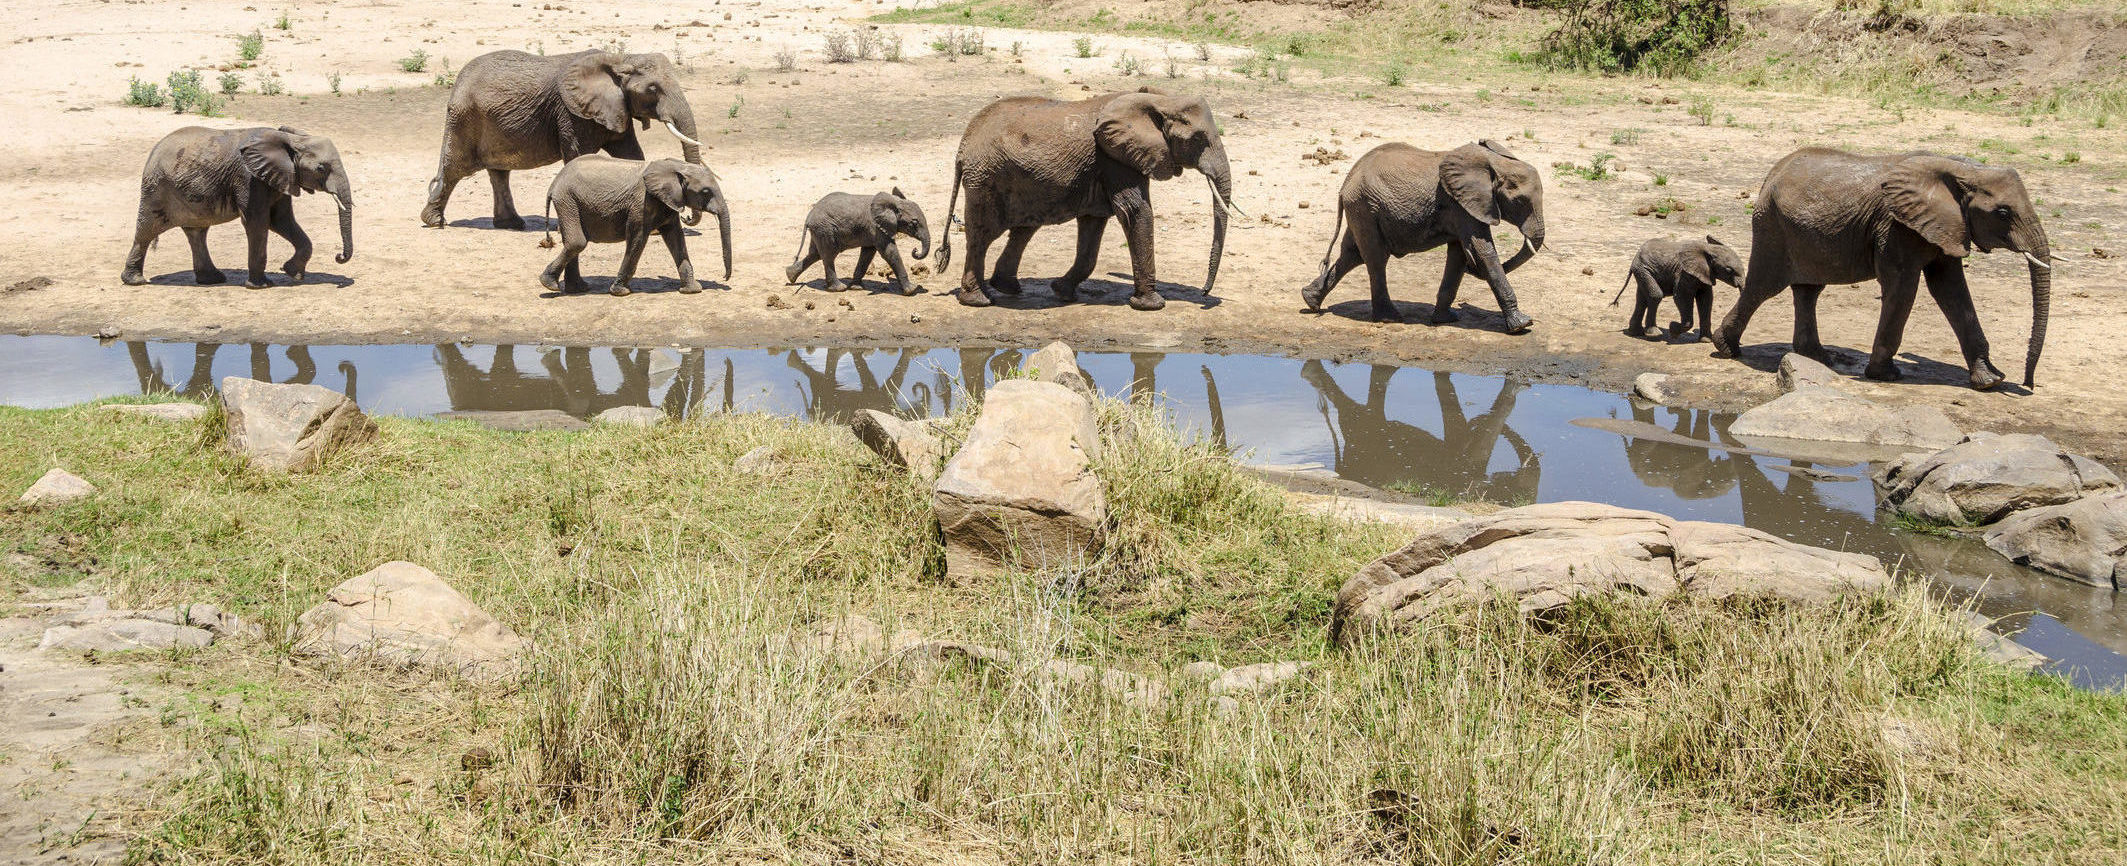 Witness extraordinary Tanzania wildlife like these wild elephant when you take a tailor-made holiday with Alfred&.